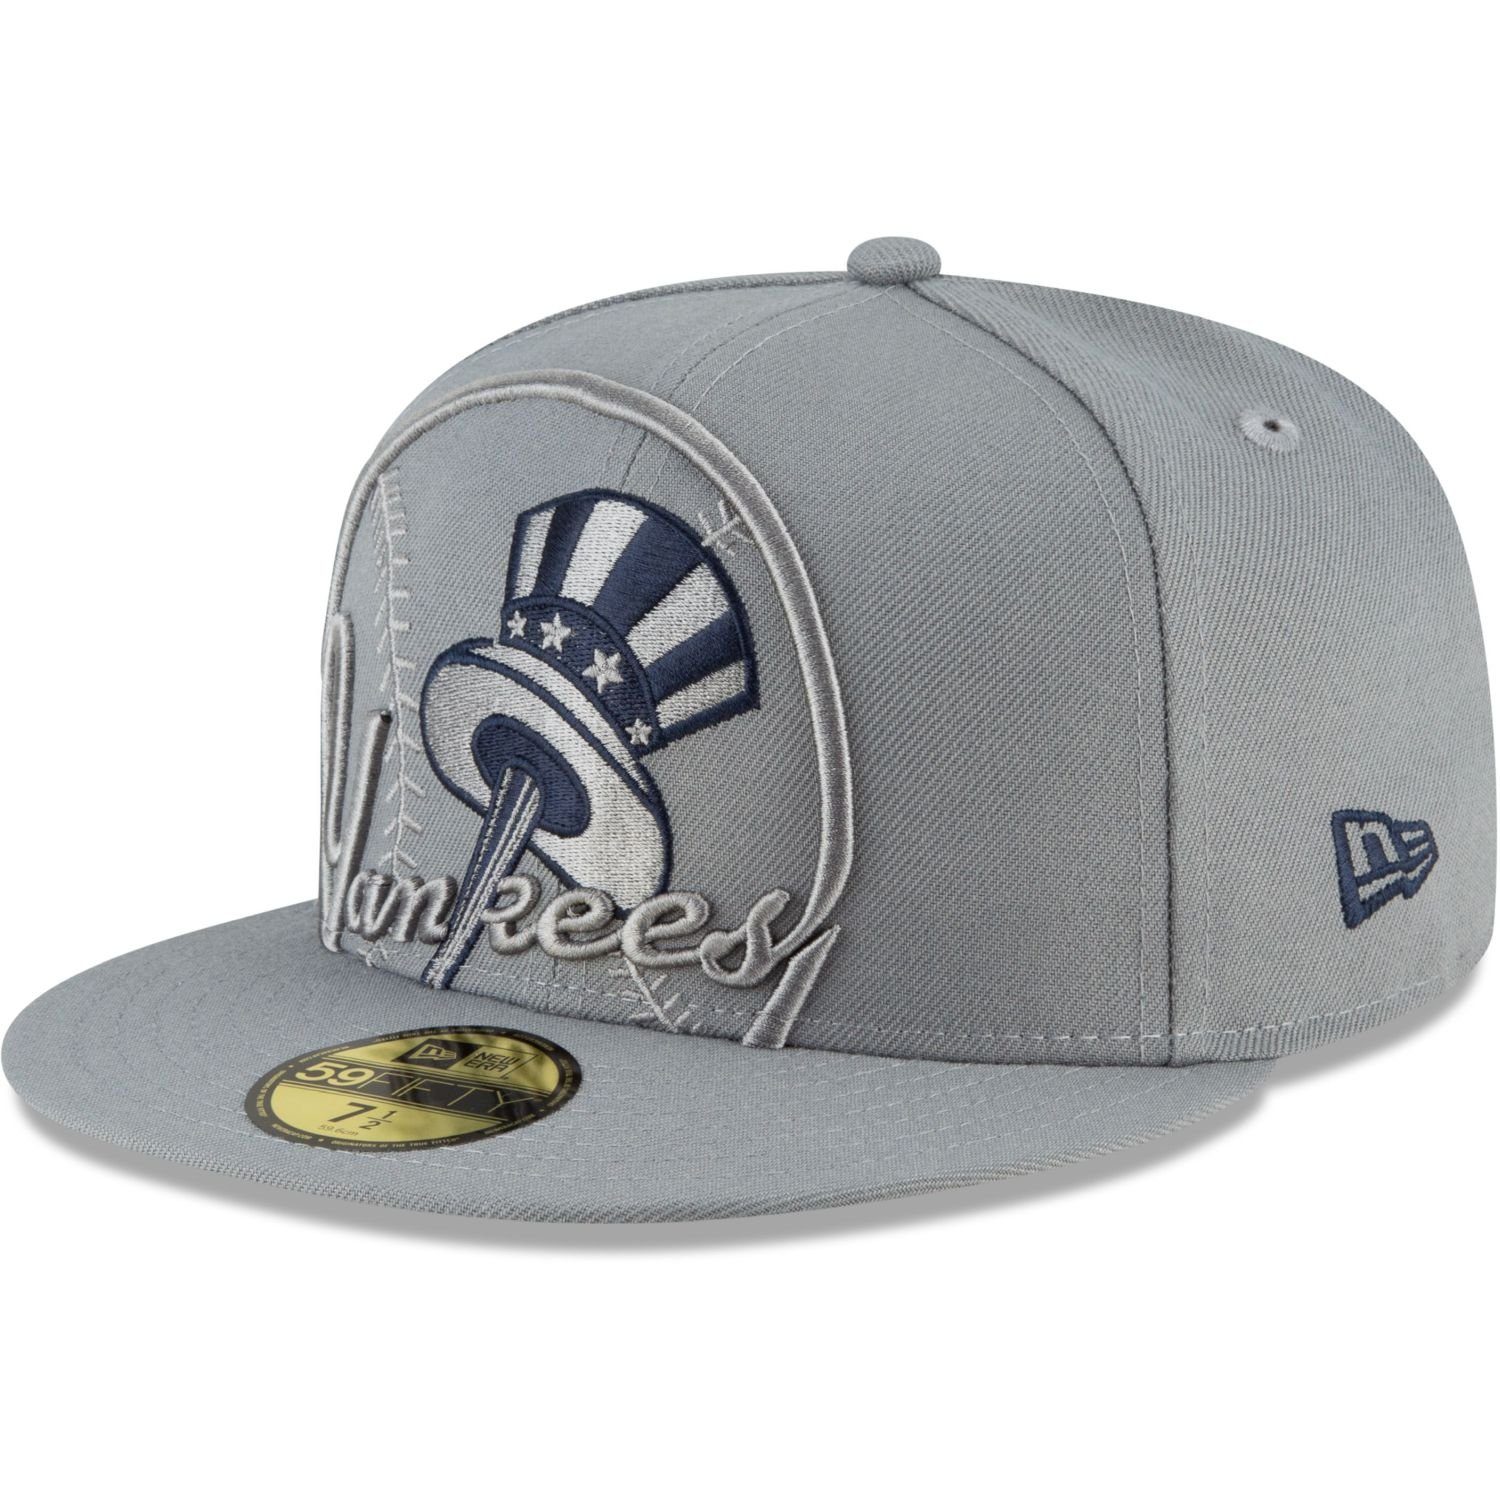 New Era Fitted Cap 59Fifty STORM GREY MLB Cooperstown Team New York Yankees